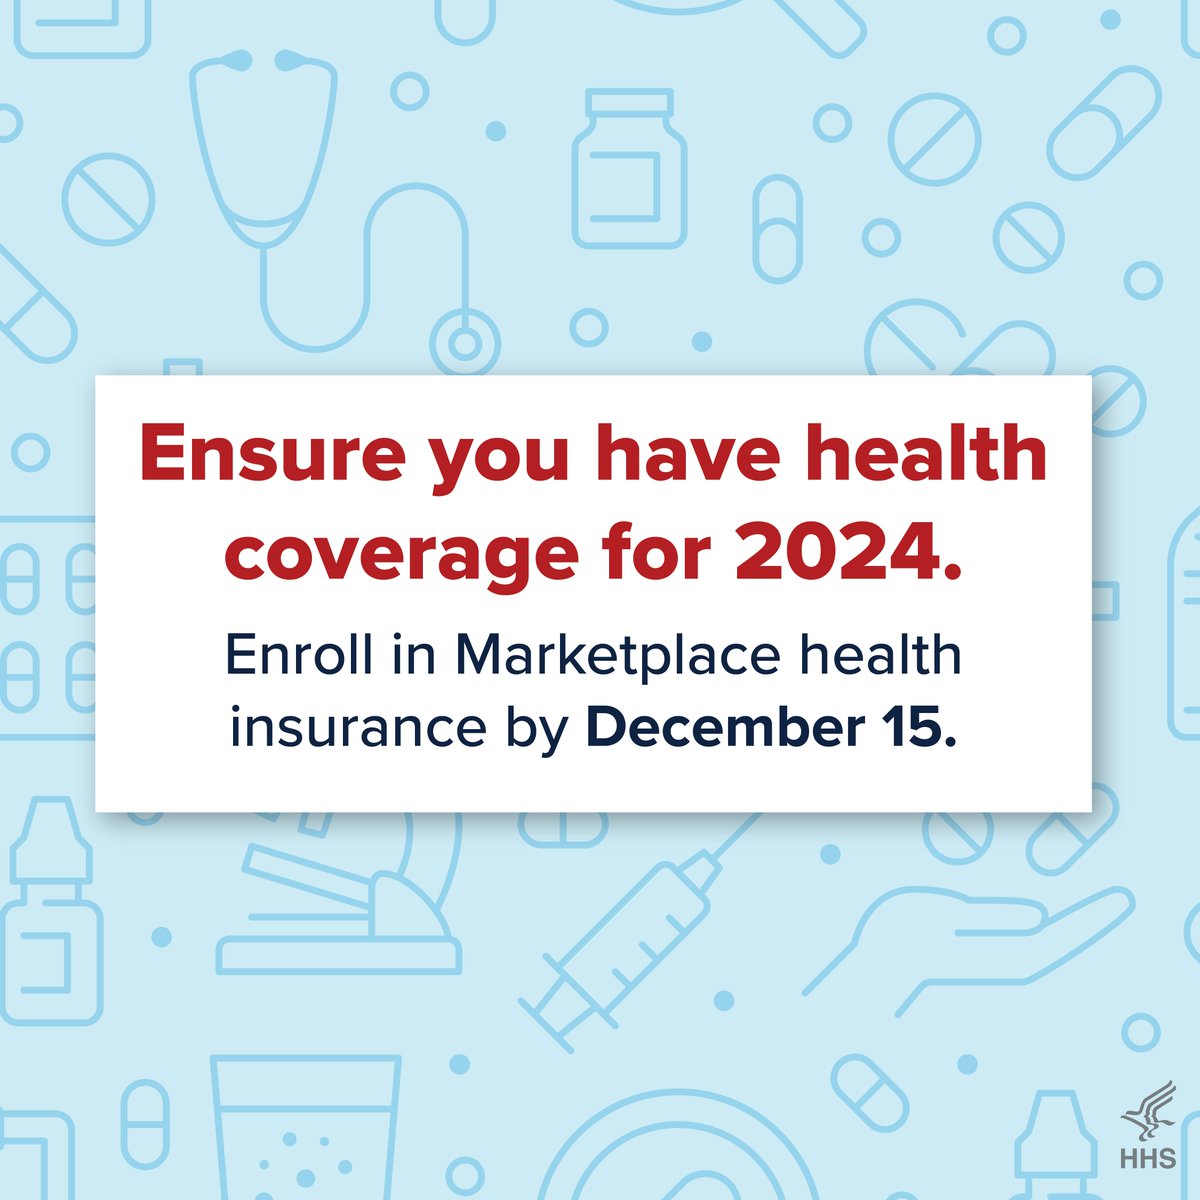 Don't miss out on health coverage for 2024! If you want your coverage to kick in on January 1, enroll in Marketplace health insurance by December 15. 🩺 Find a plan that suits your needs at healthcare.gov/get-coverage/. @HealthCareGov